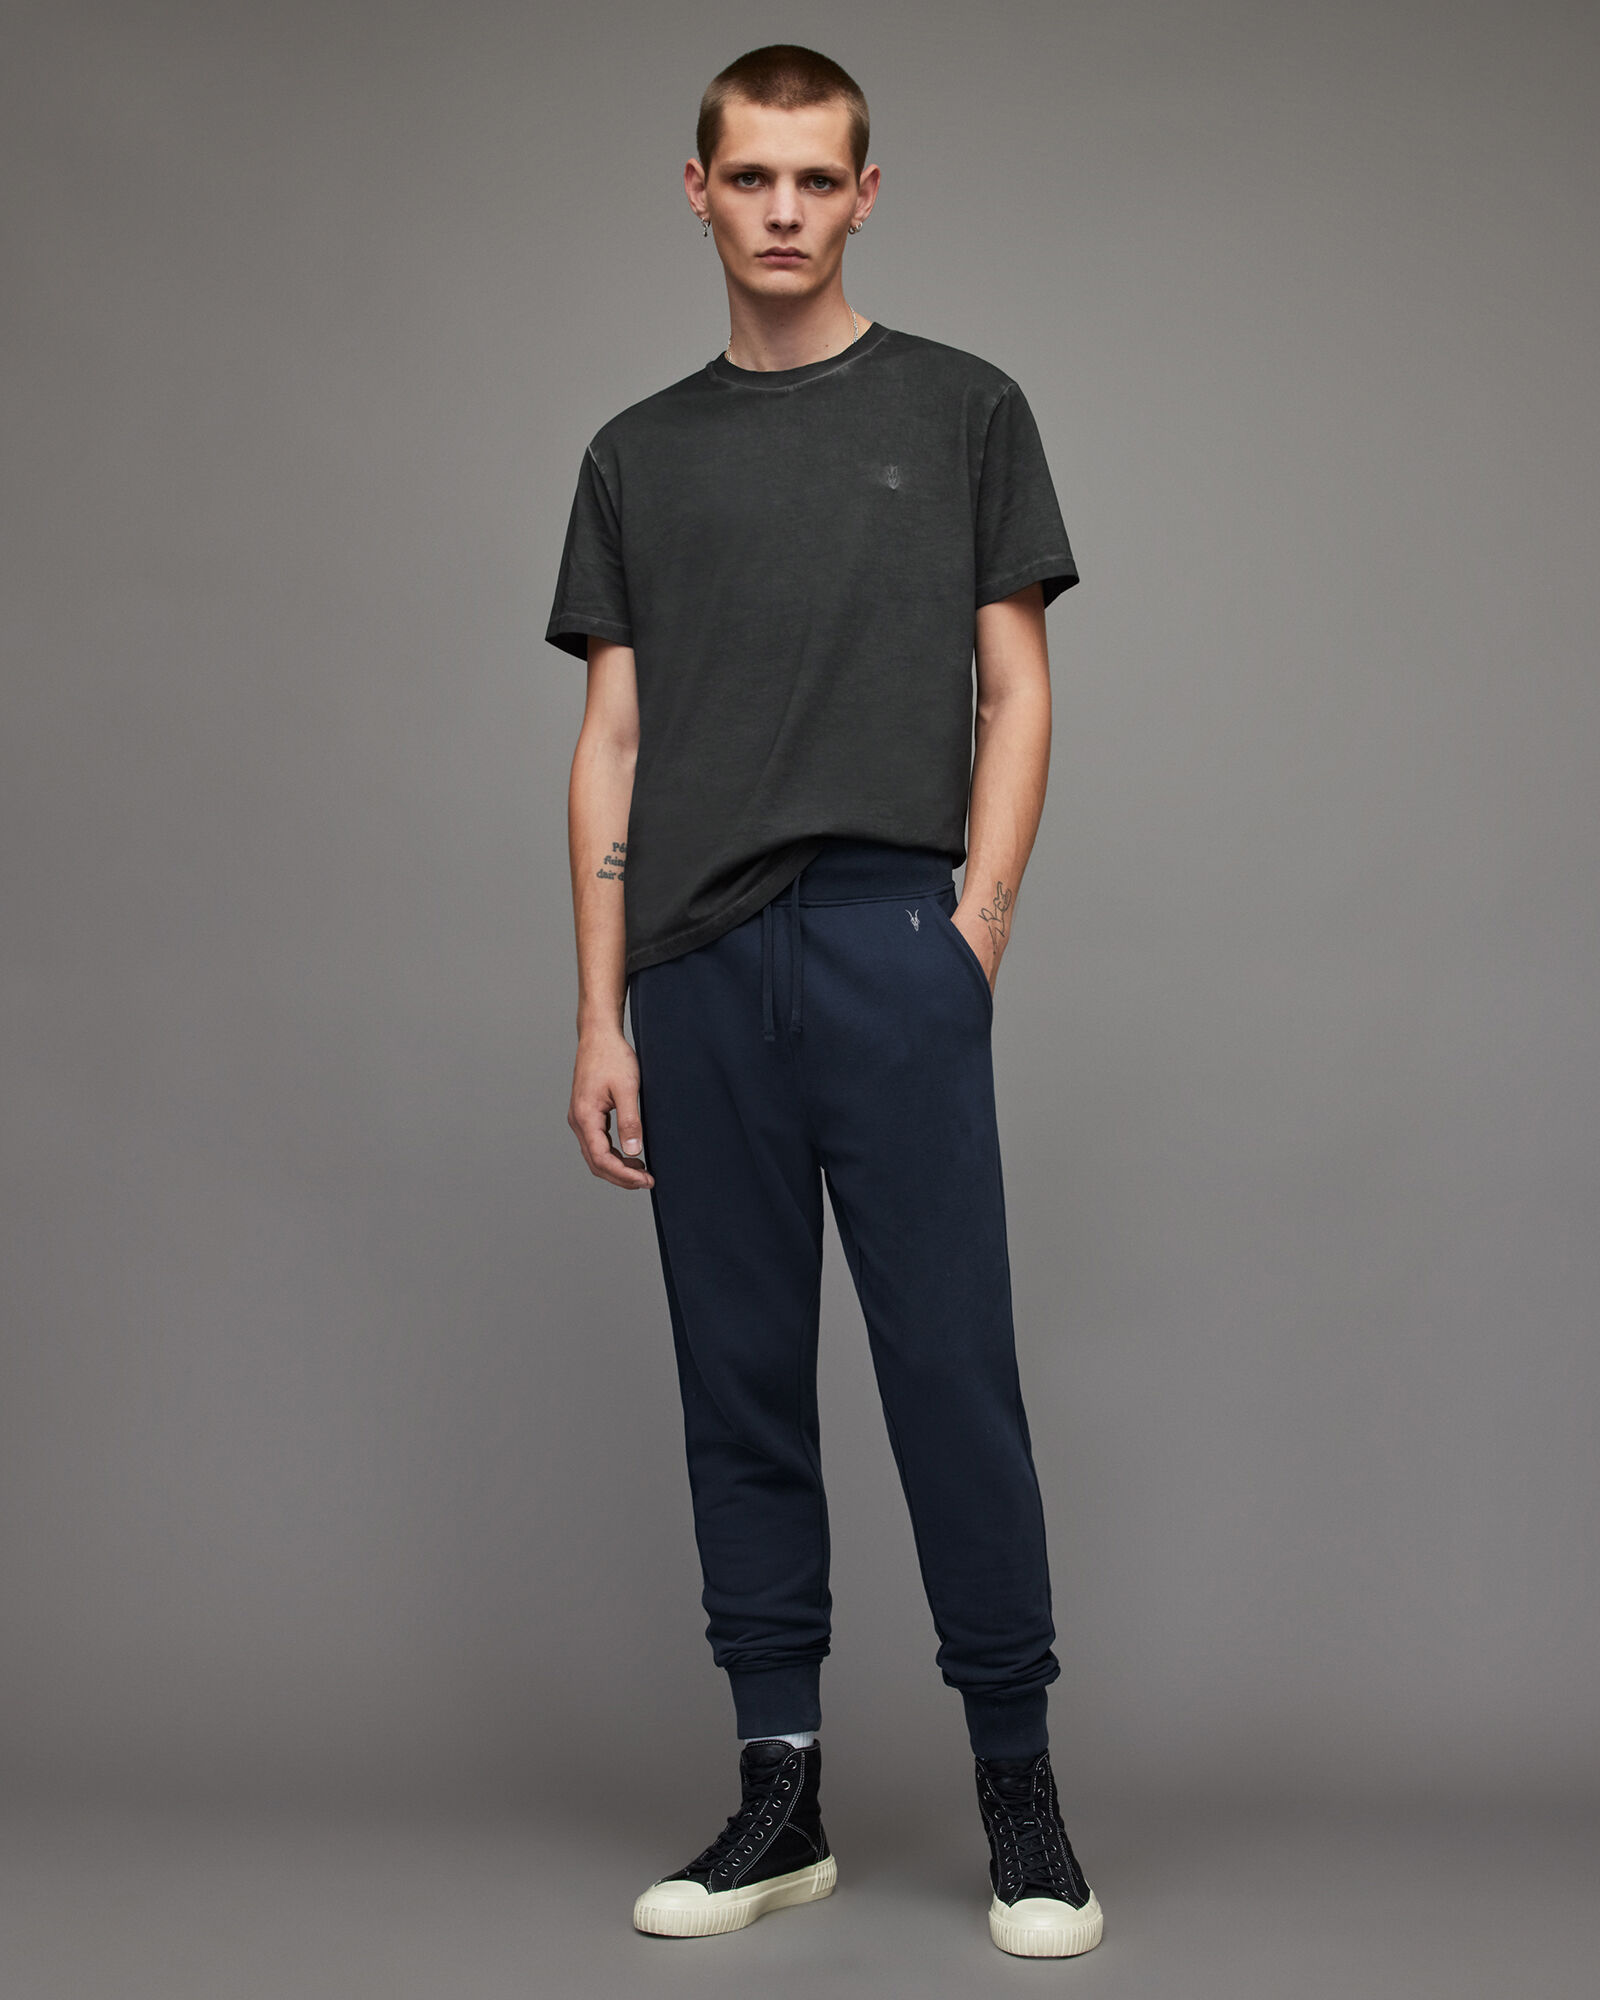 Mens Trousers  Mens Chinos  Trousers  ALLSAINTS